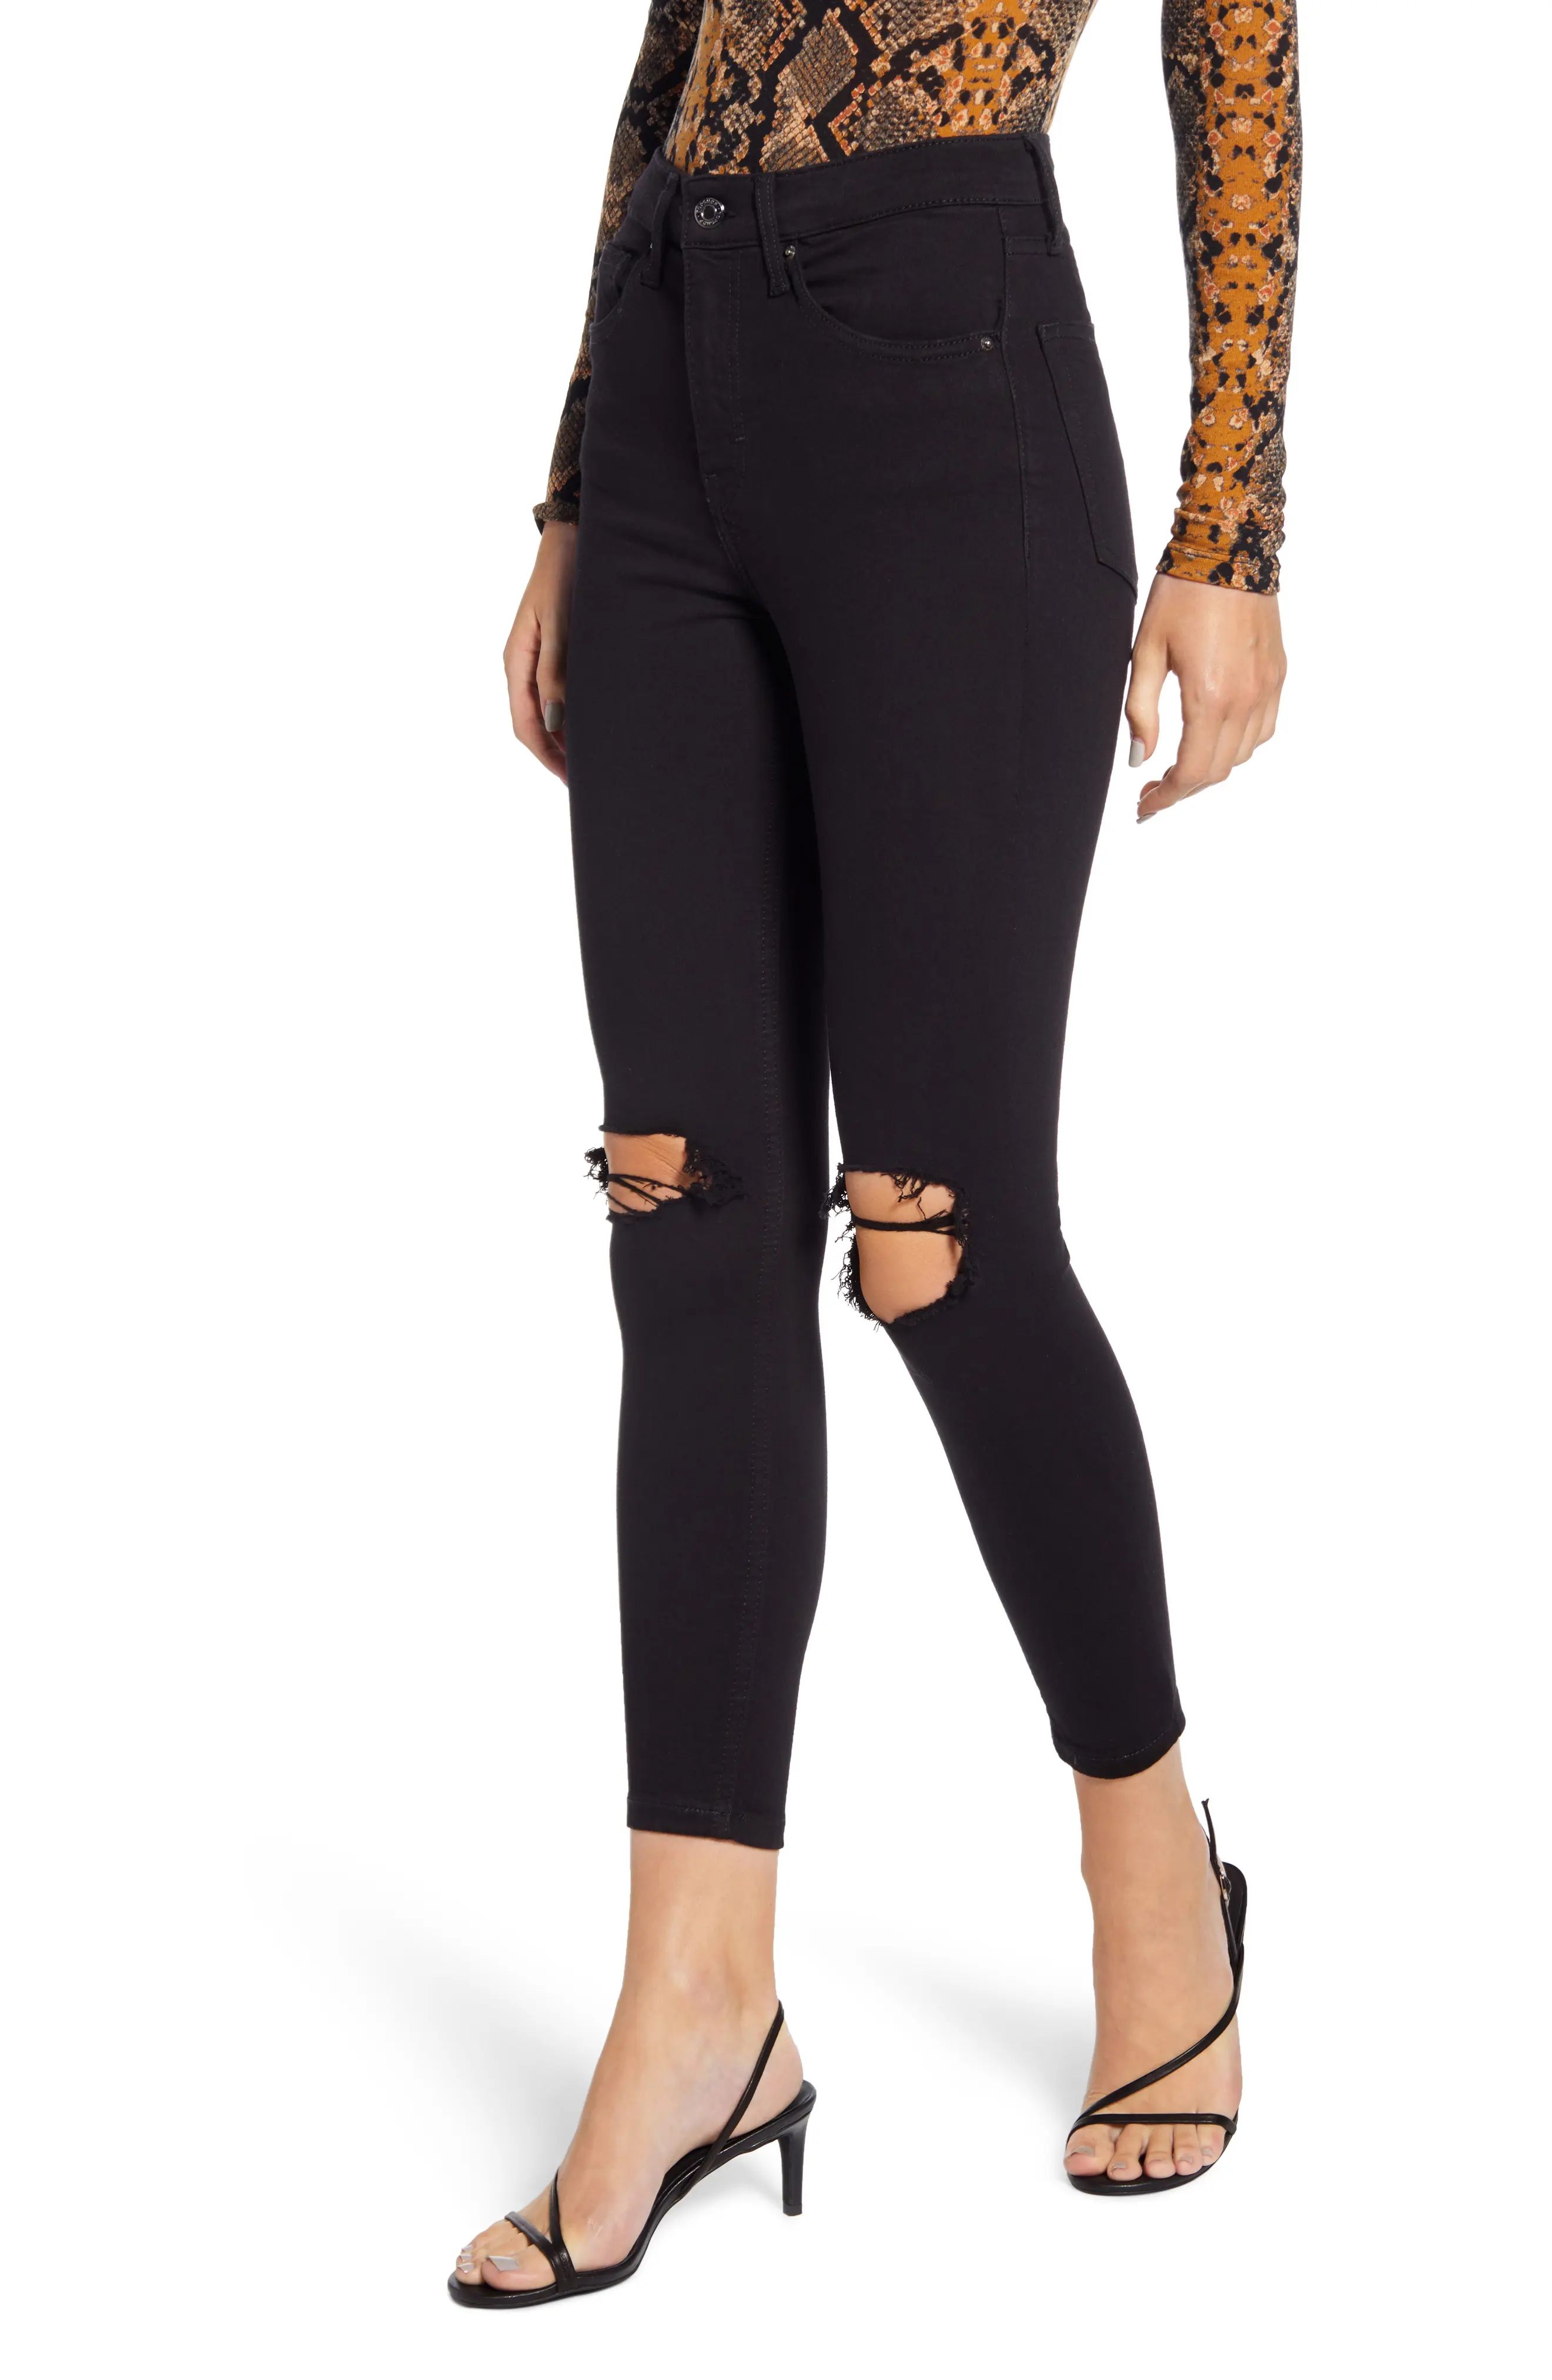 Topshop Jamie High Waist Ripped Skinny Jeans, Size 36 in Black at Nordstrom | Nordstrom